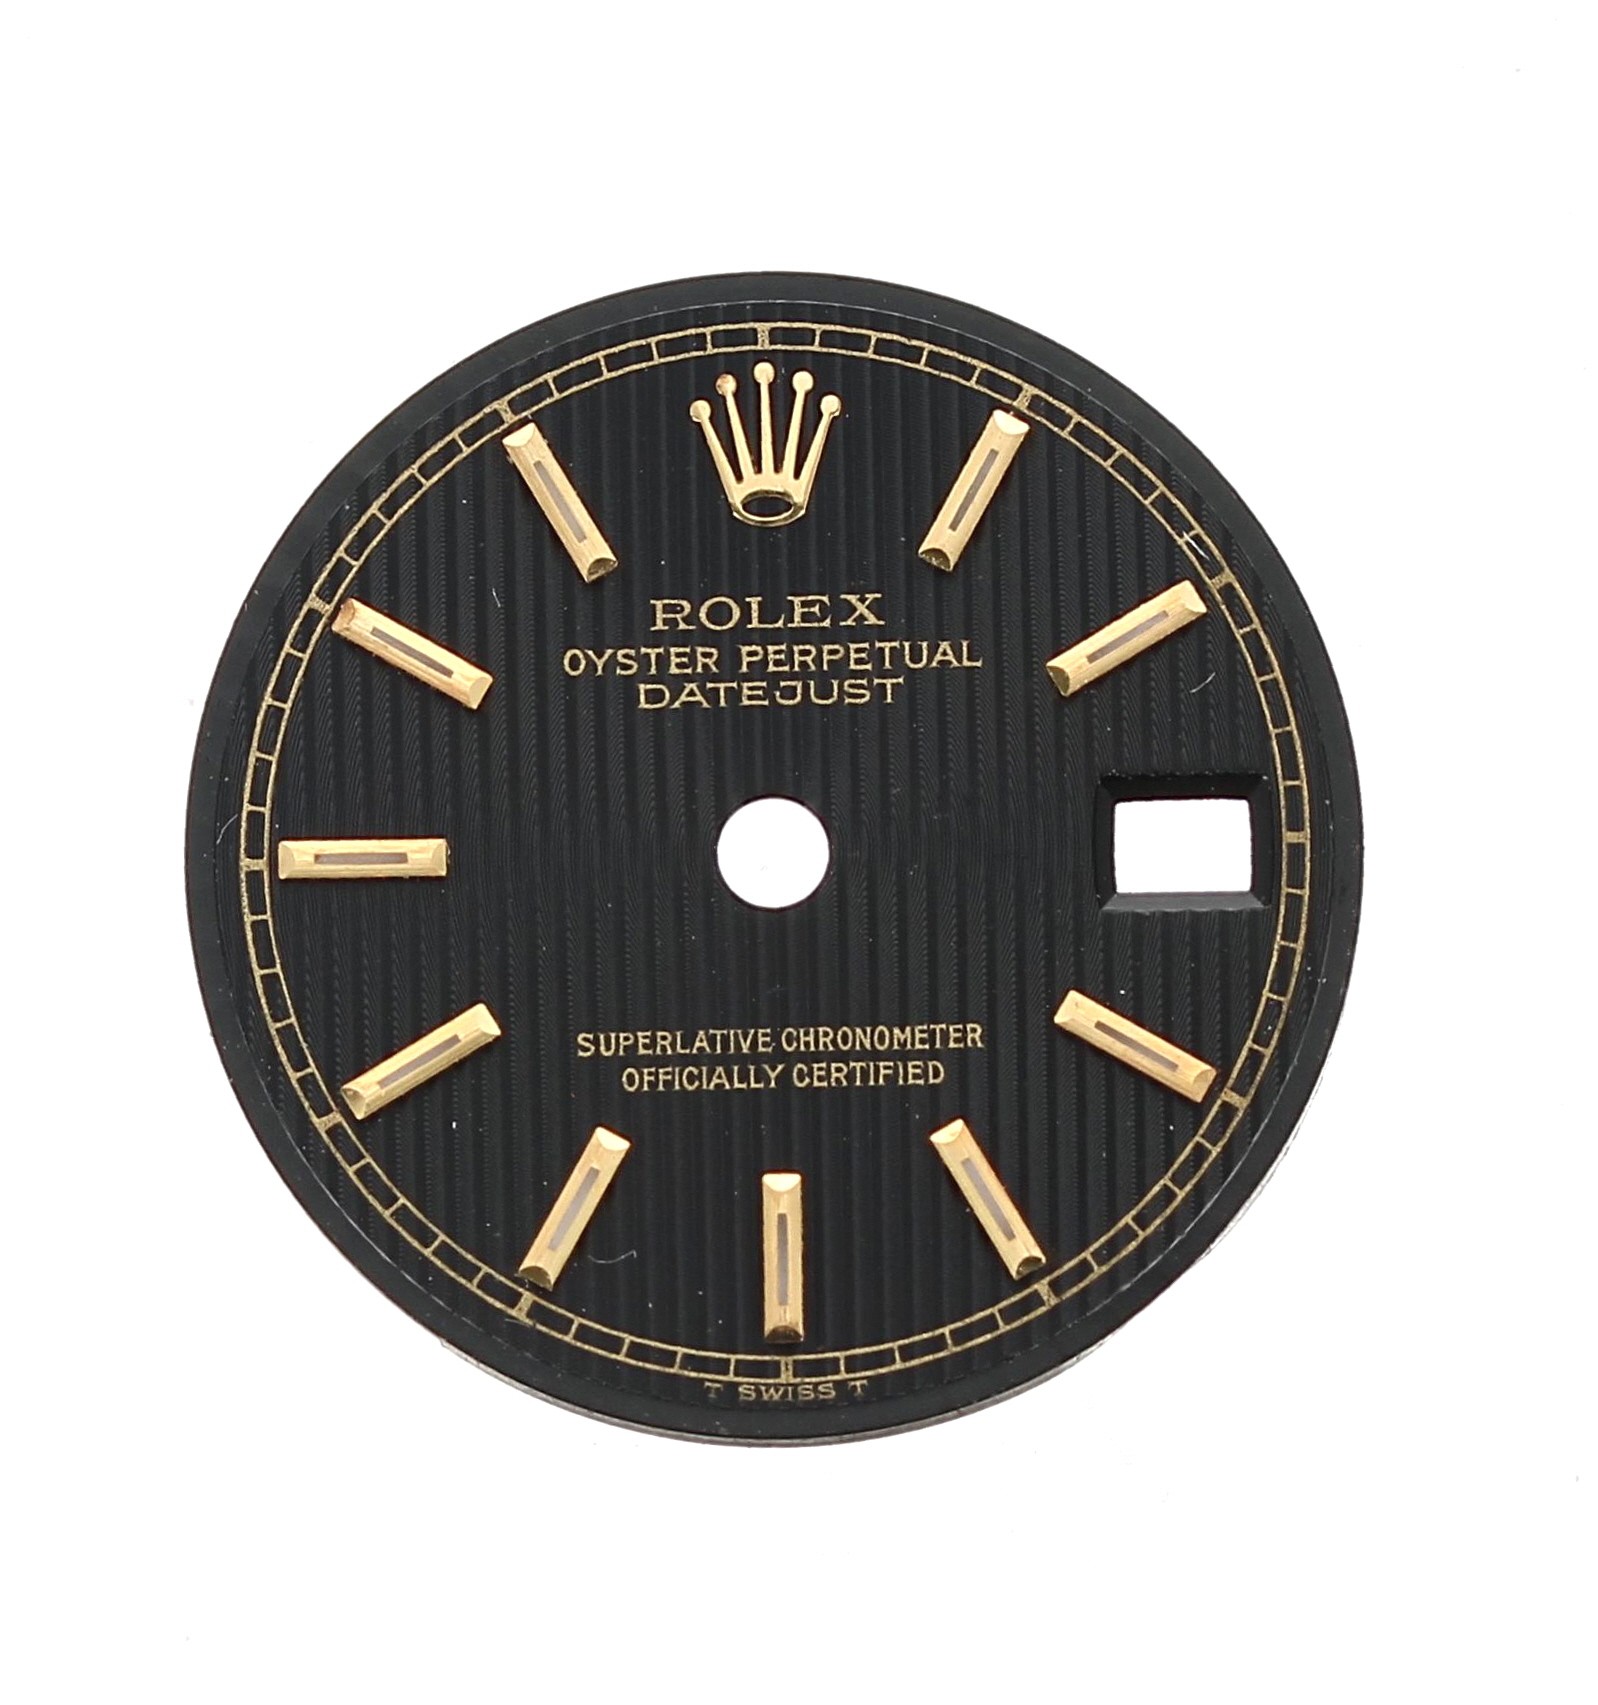 Rolex Datejust lady's black wristwatch dial for the reference 69173, 20mm